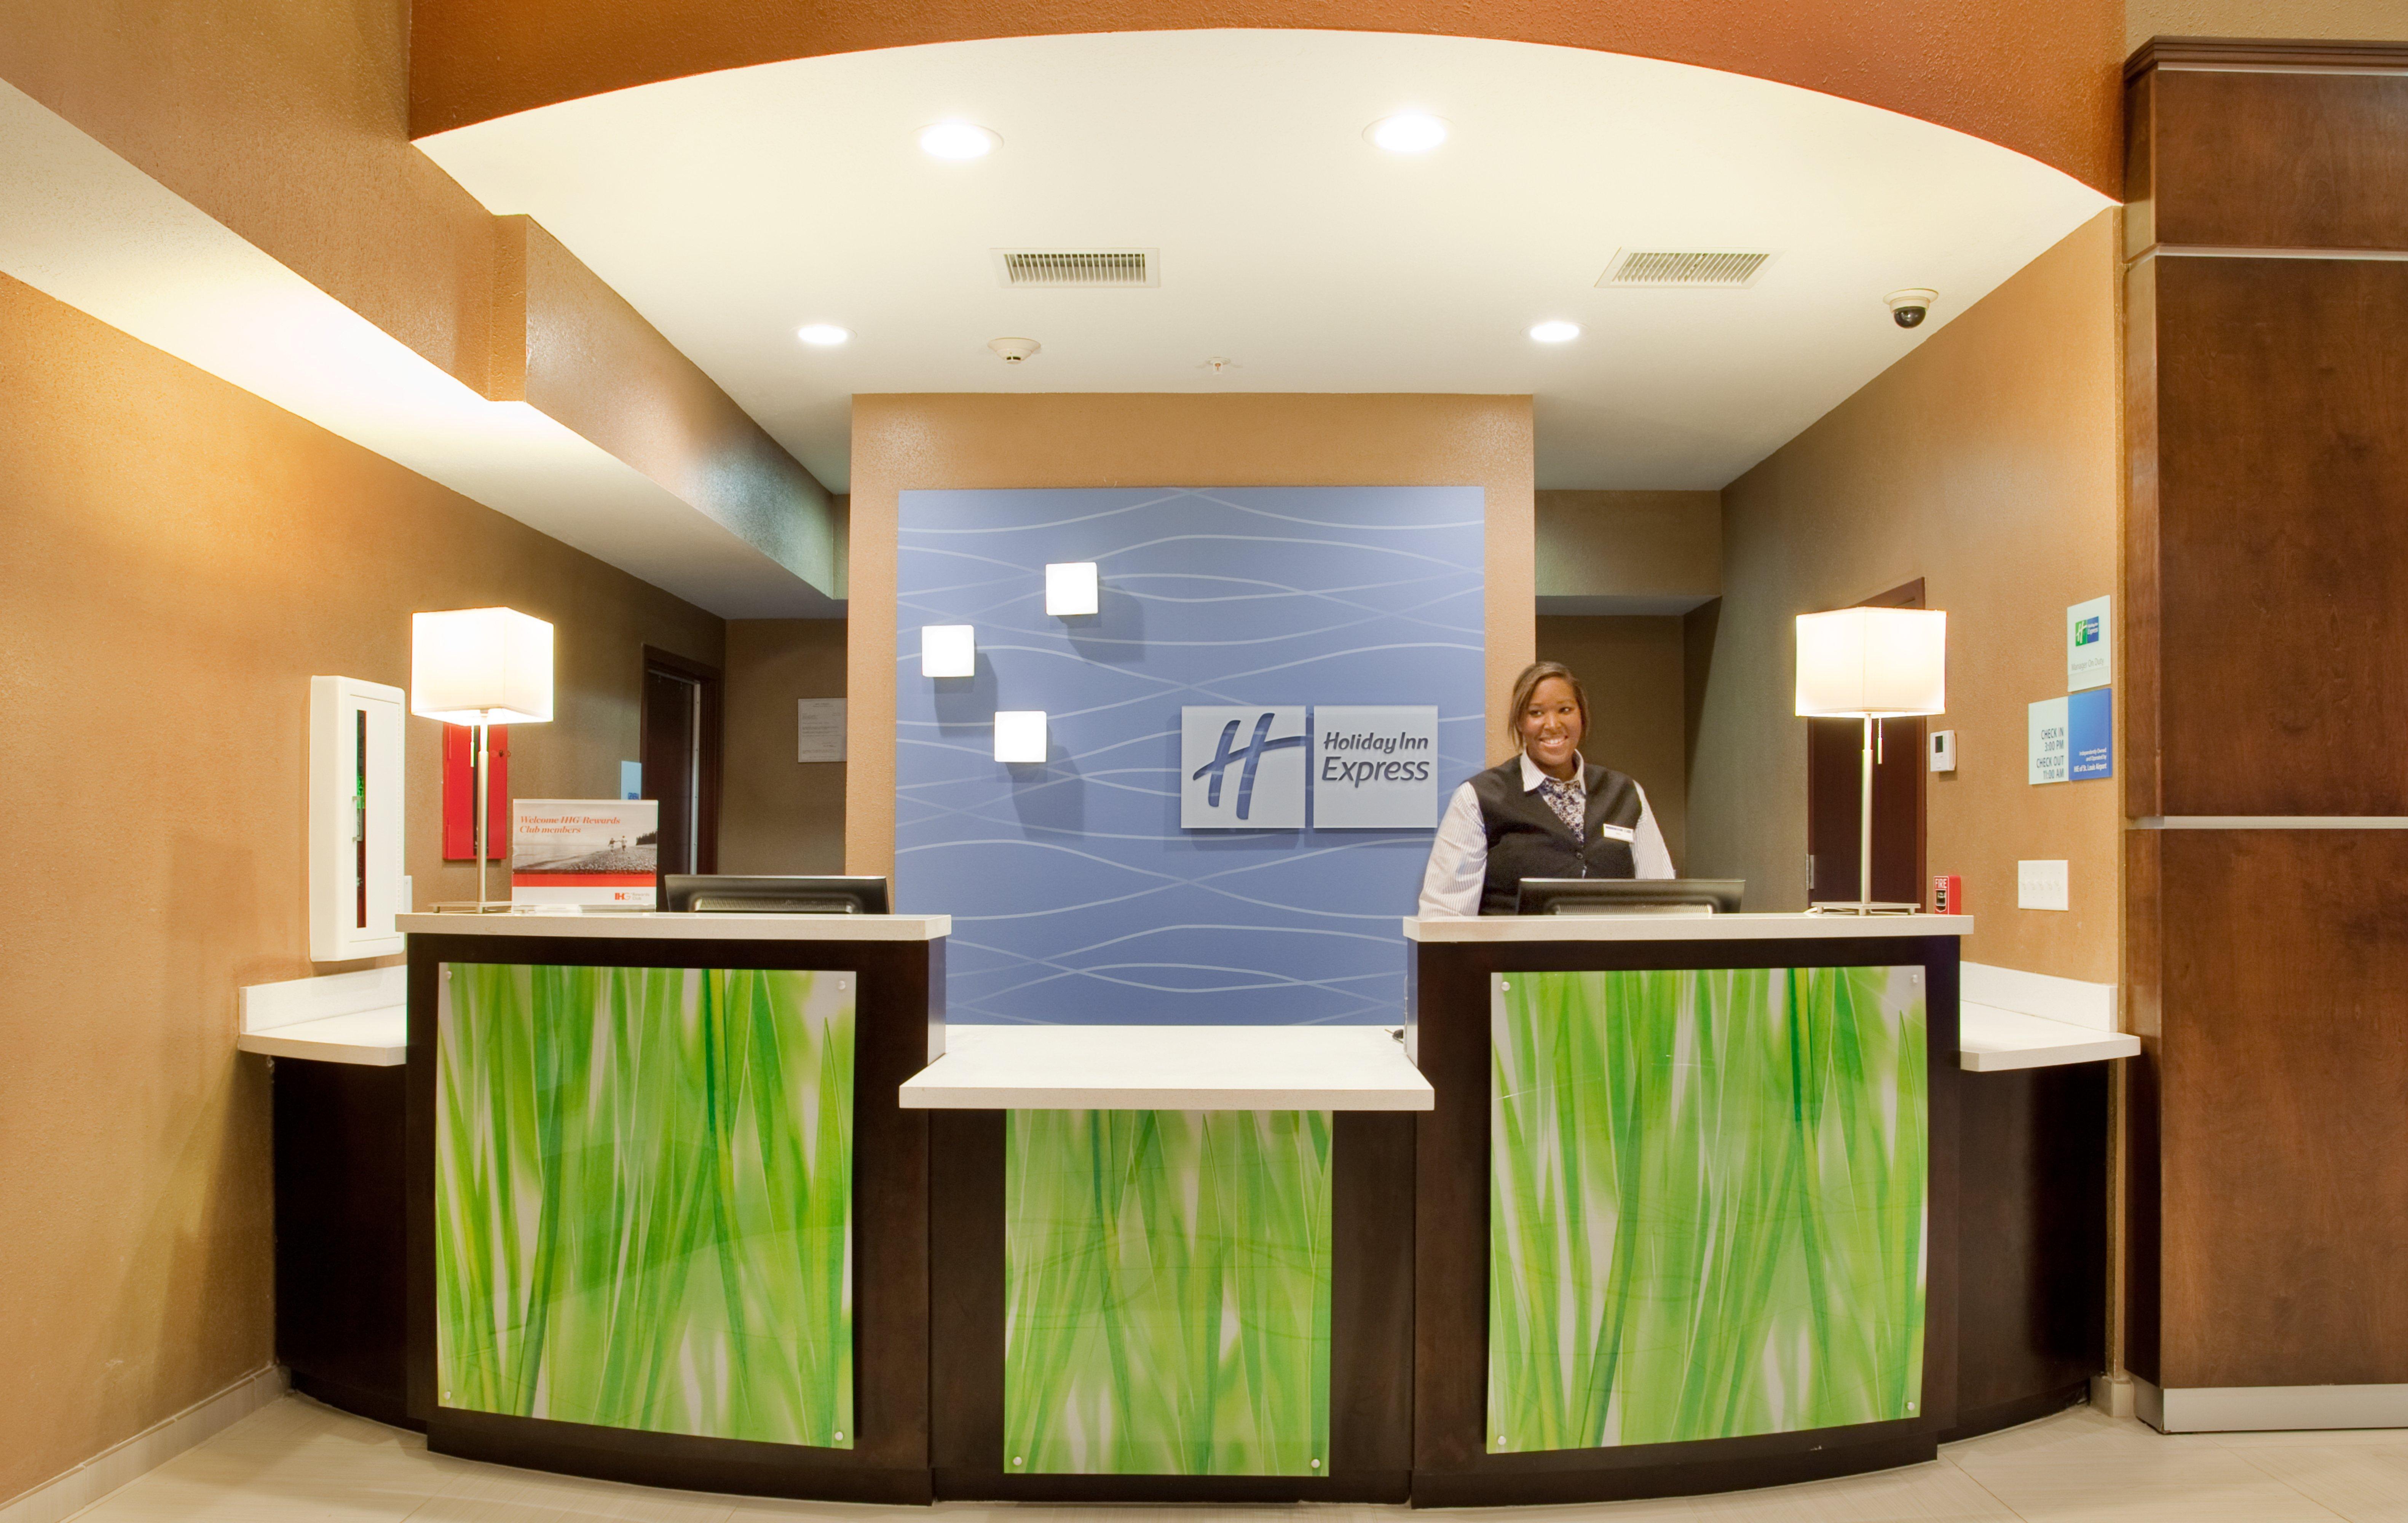 HOTEL HOLIDAY INN EXPRESS & SUITES ST LOUIS AIRPORT SAINT LOUIS, MO 2*  (United States) - from US$ 149 | BOOKED